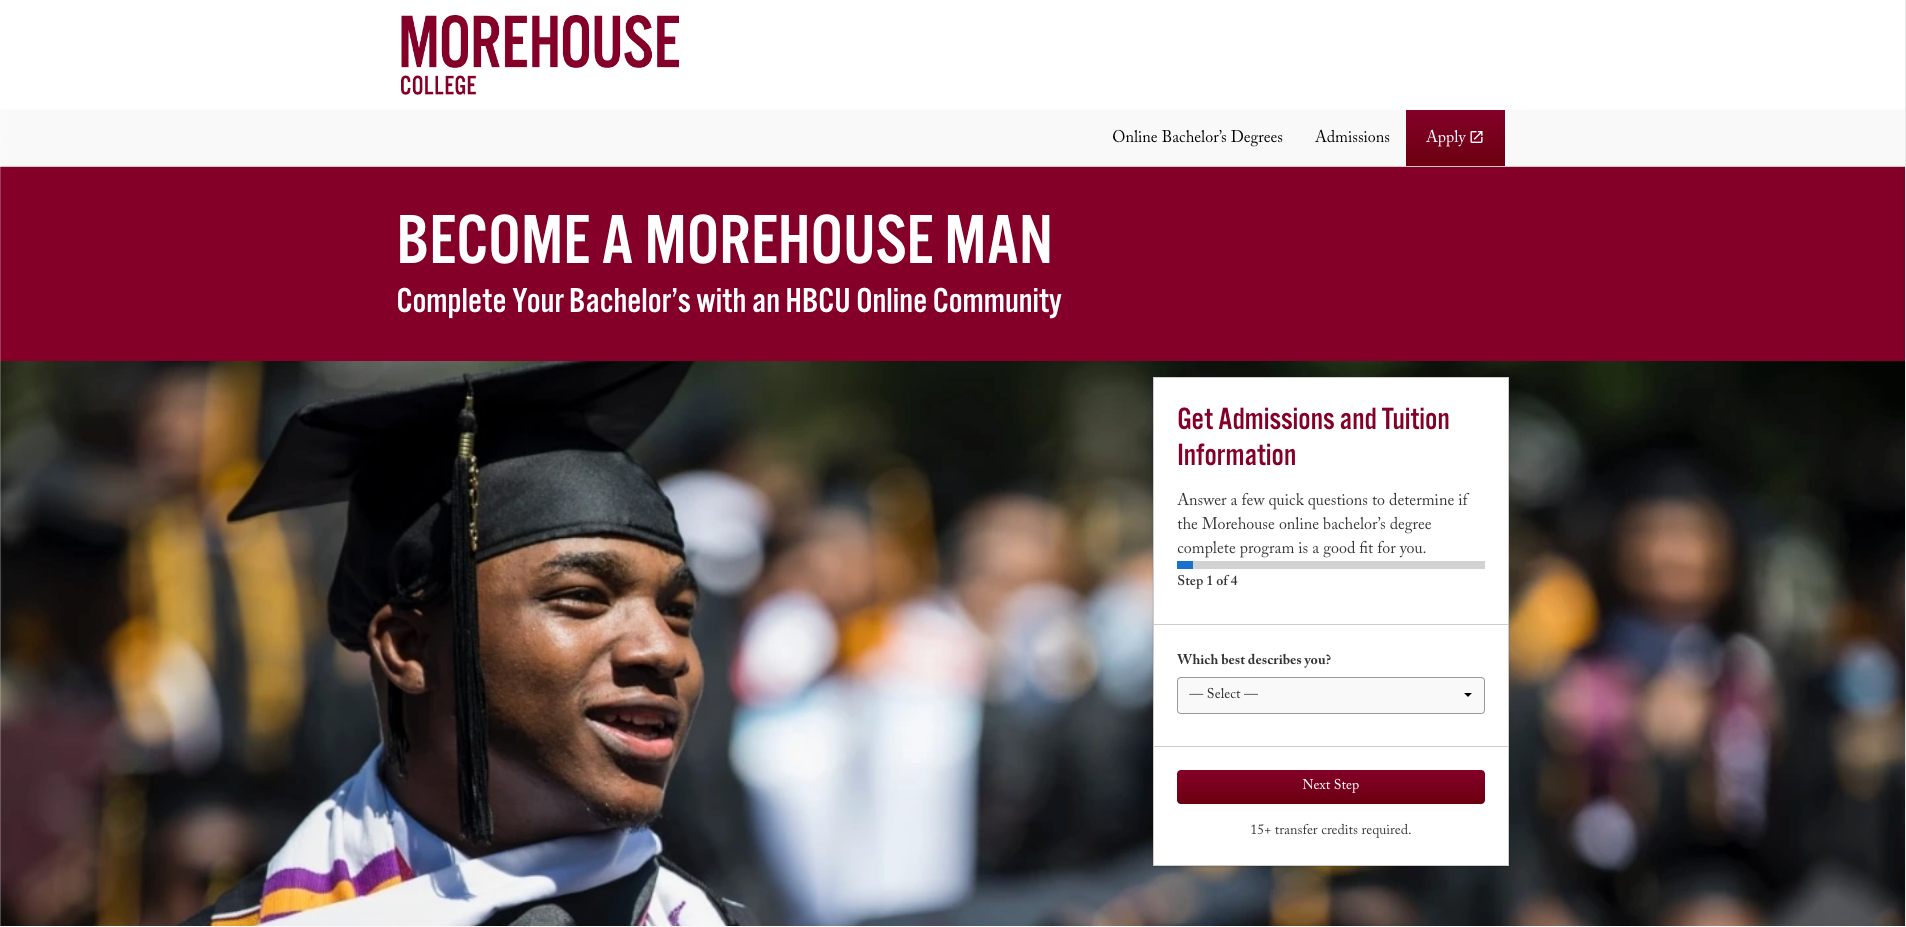 The online landing page for Morehouse Online, shown here, attracts prospective students with the promise of becoming a "Morehouse Man."